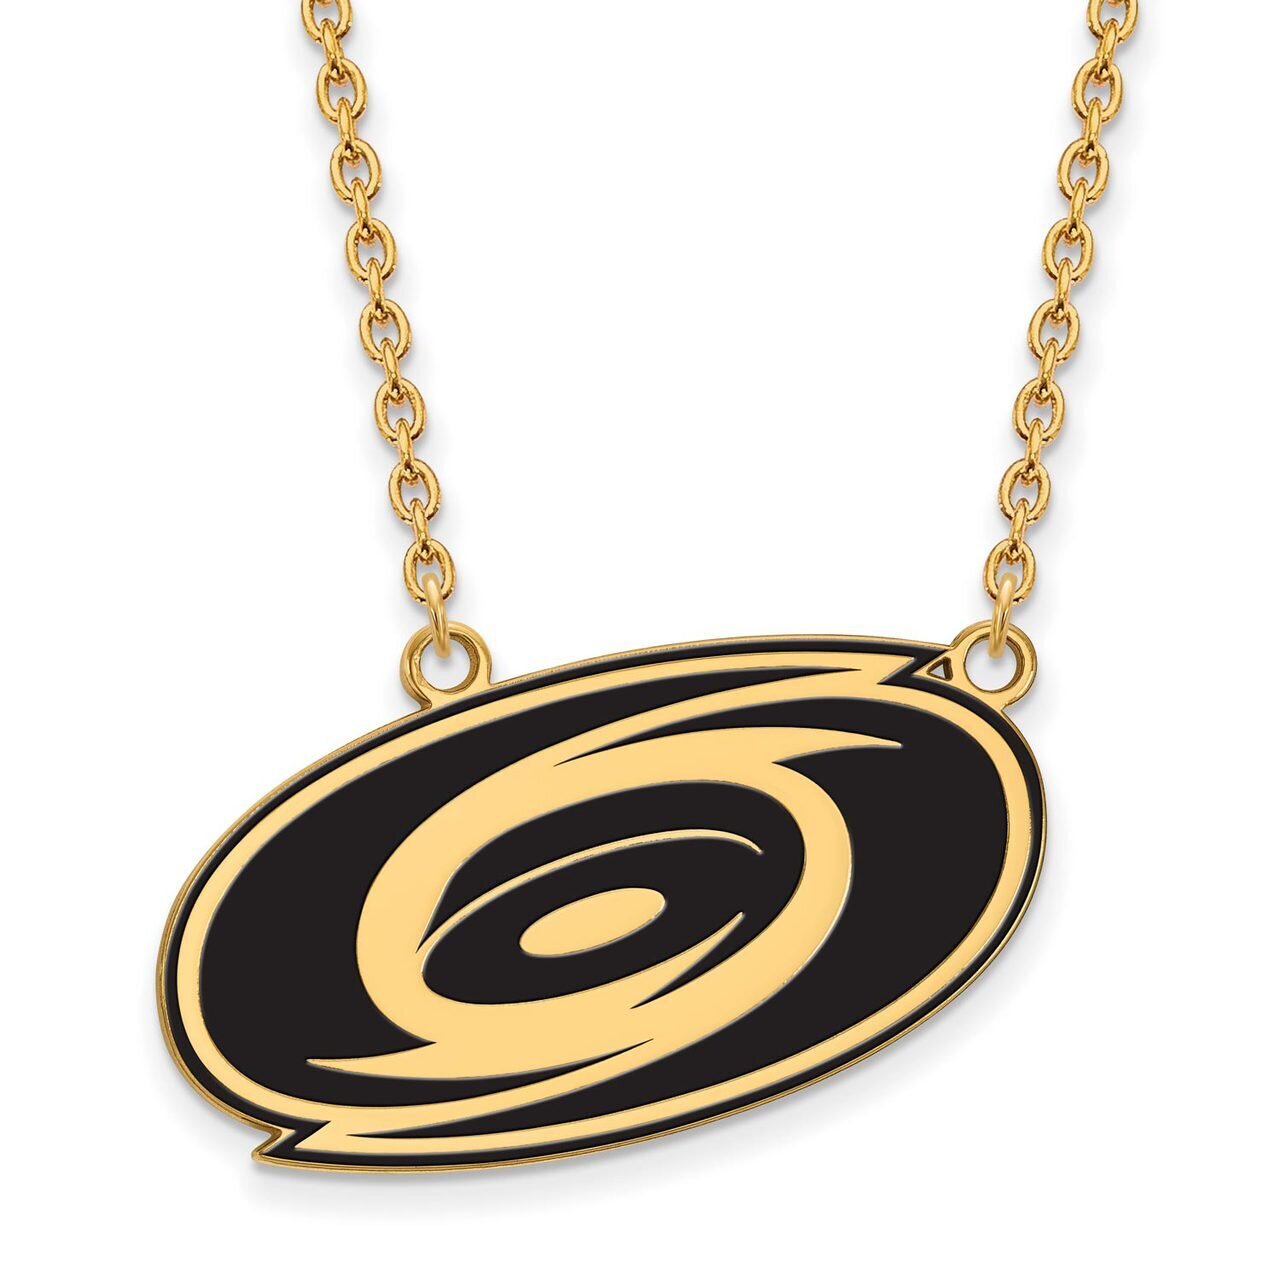 Carolina Hurricanes Large Enamel Pendant with Chain Necklace Gold-plated Silver GP012HUR-18